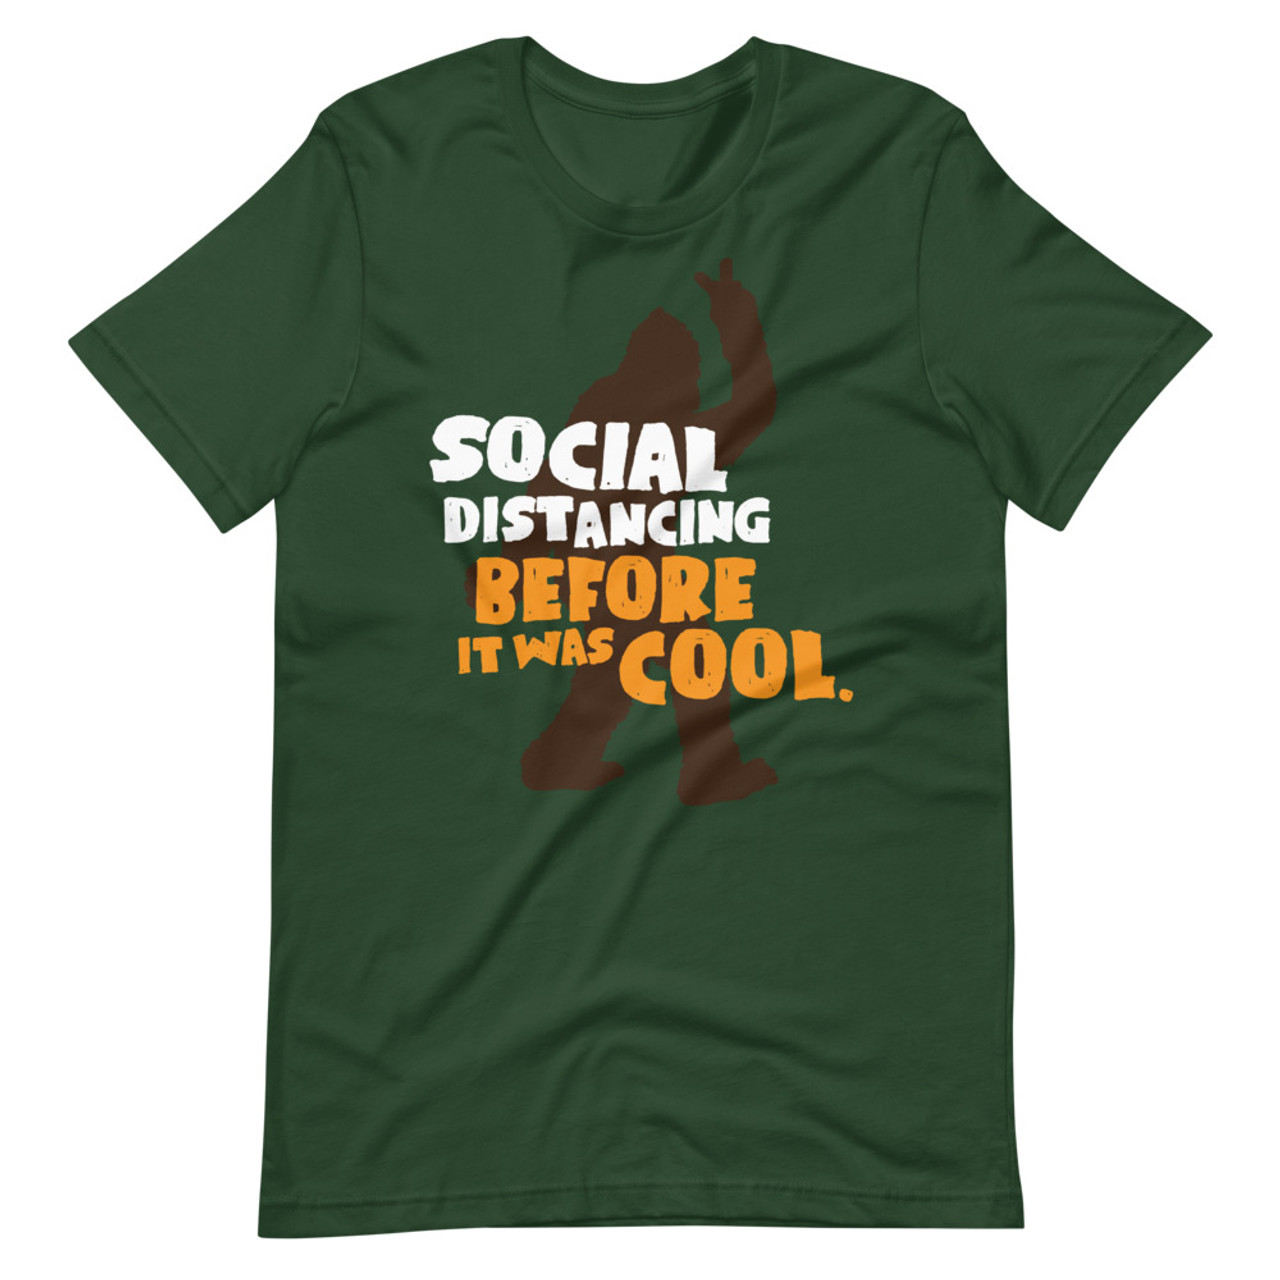 "Social Distancing before it was cool"